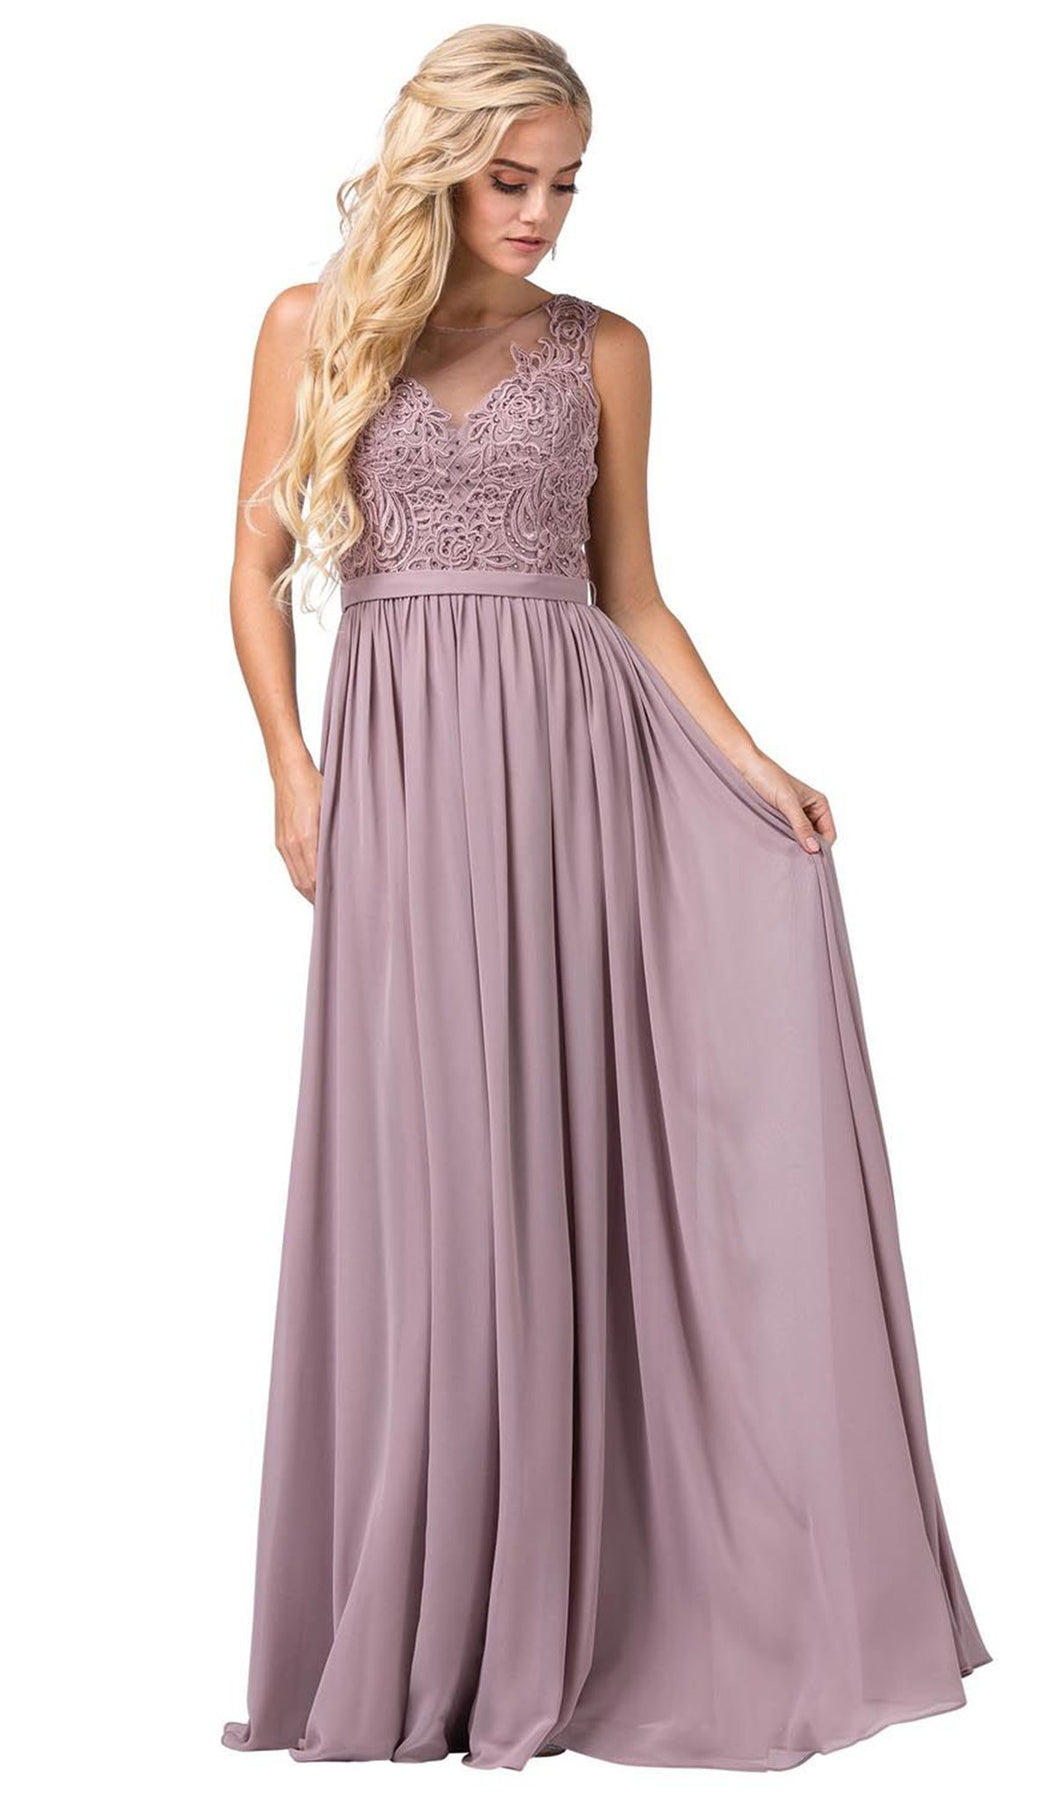 Dancing Queen - 2677 Illusion Neckline Beaded Lace Bodice Chiffon Gown In Brown